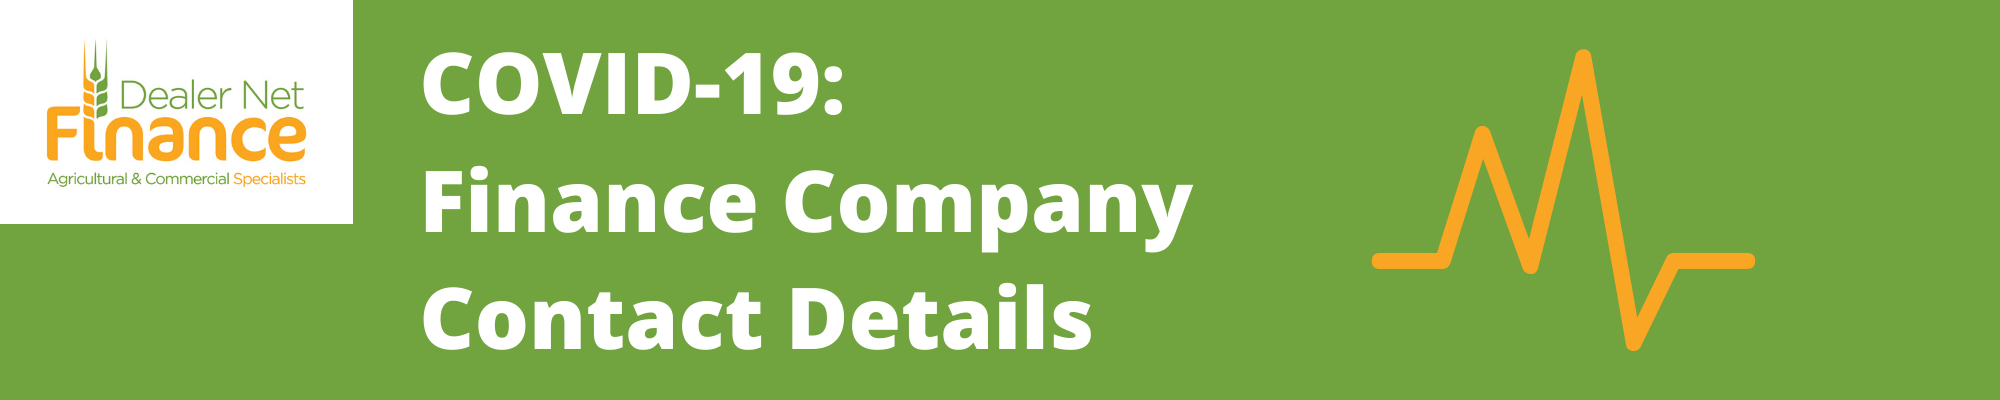 Covid-19: Finance Company Contact Details